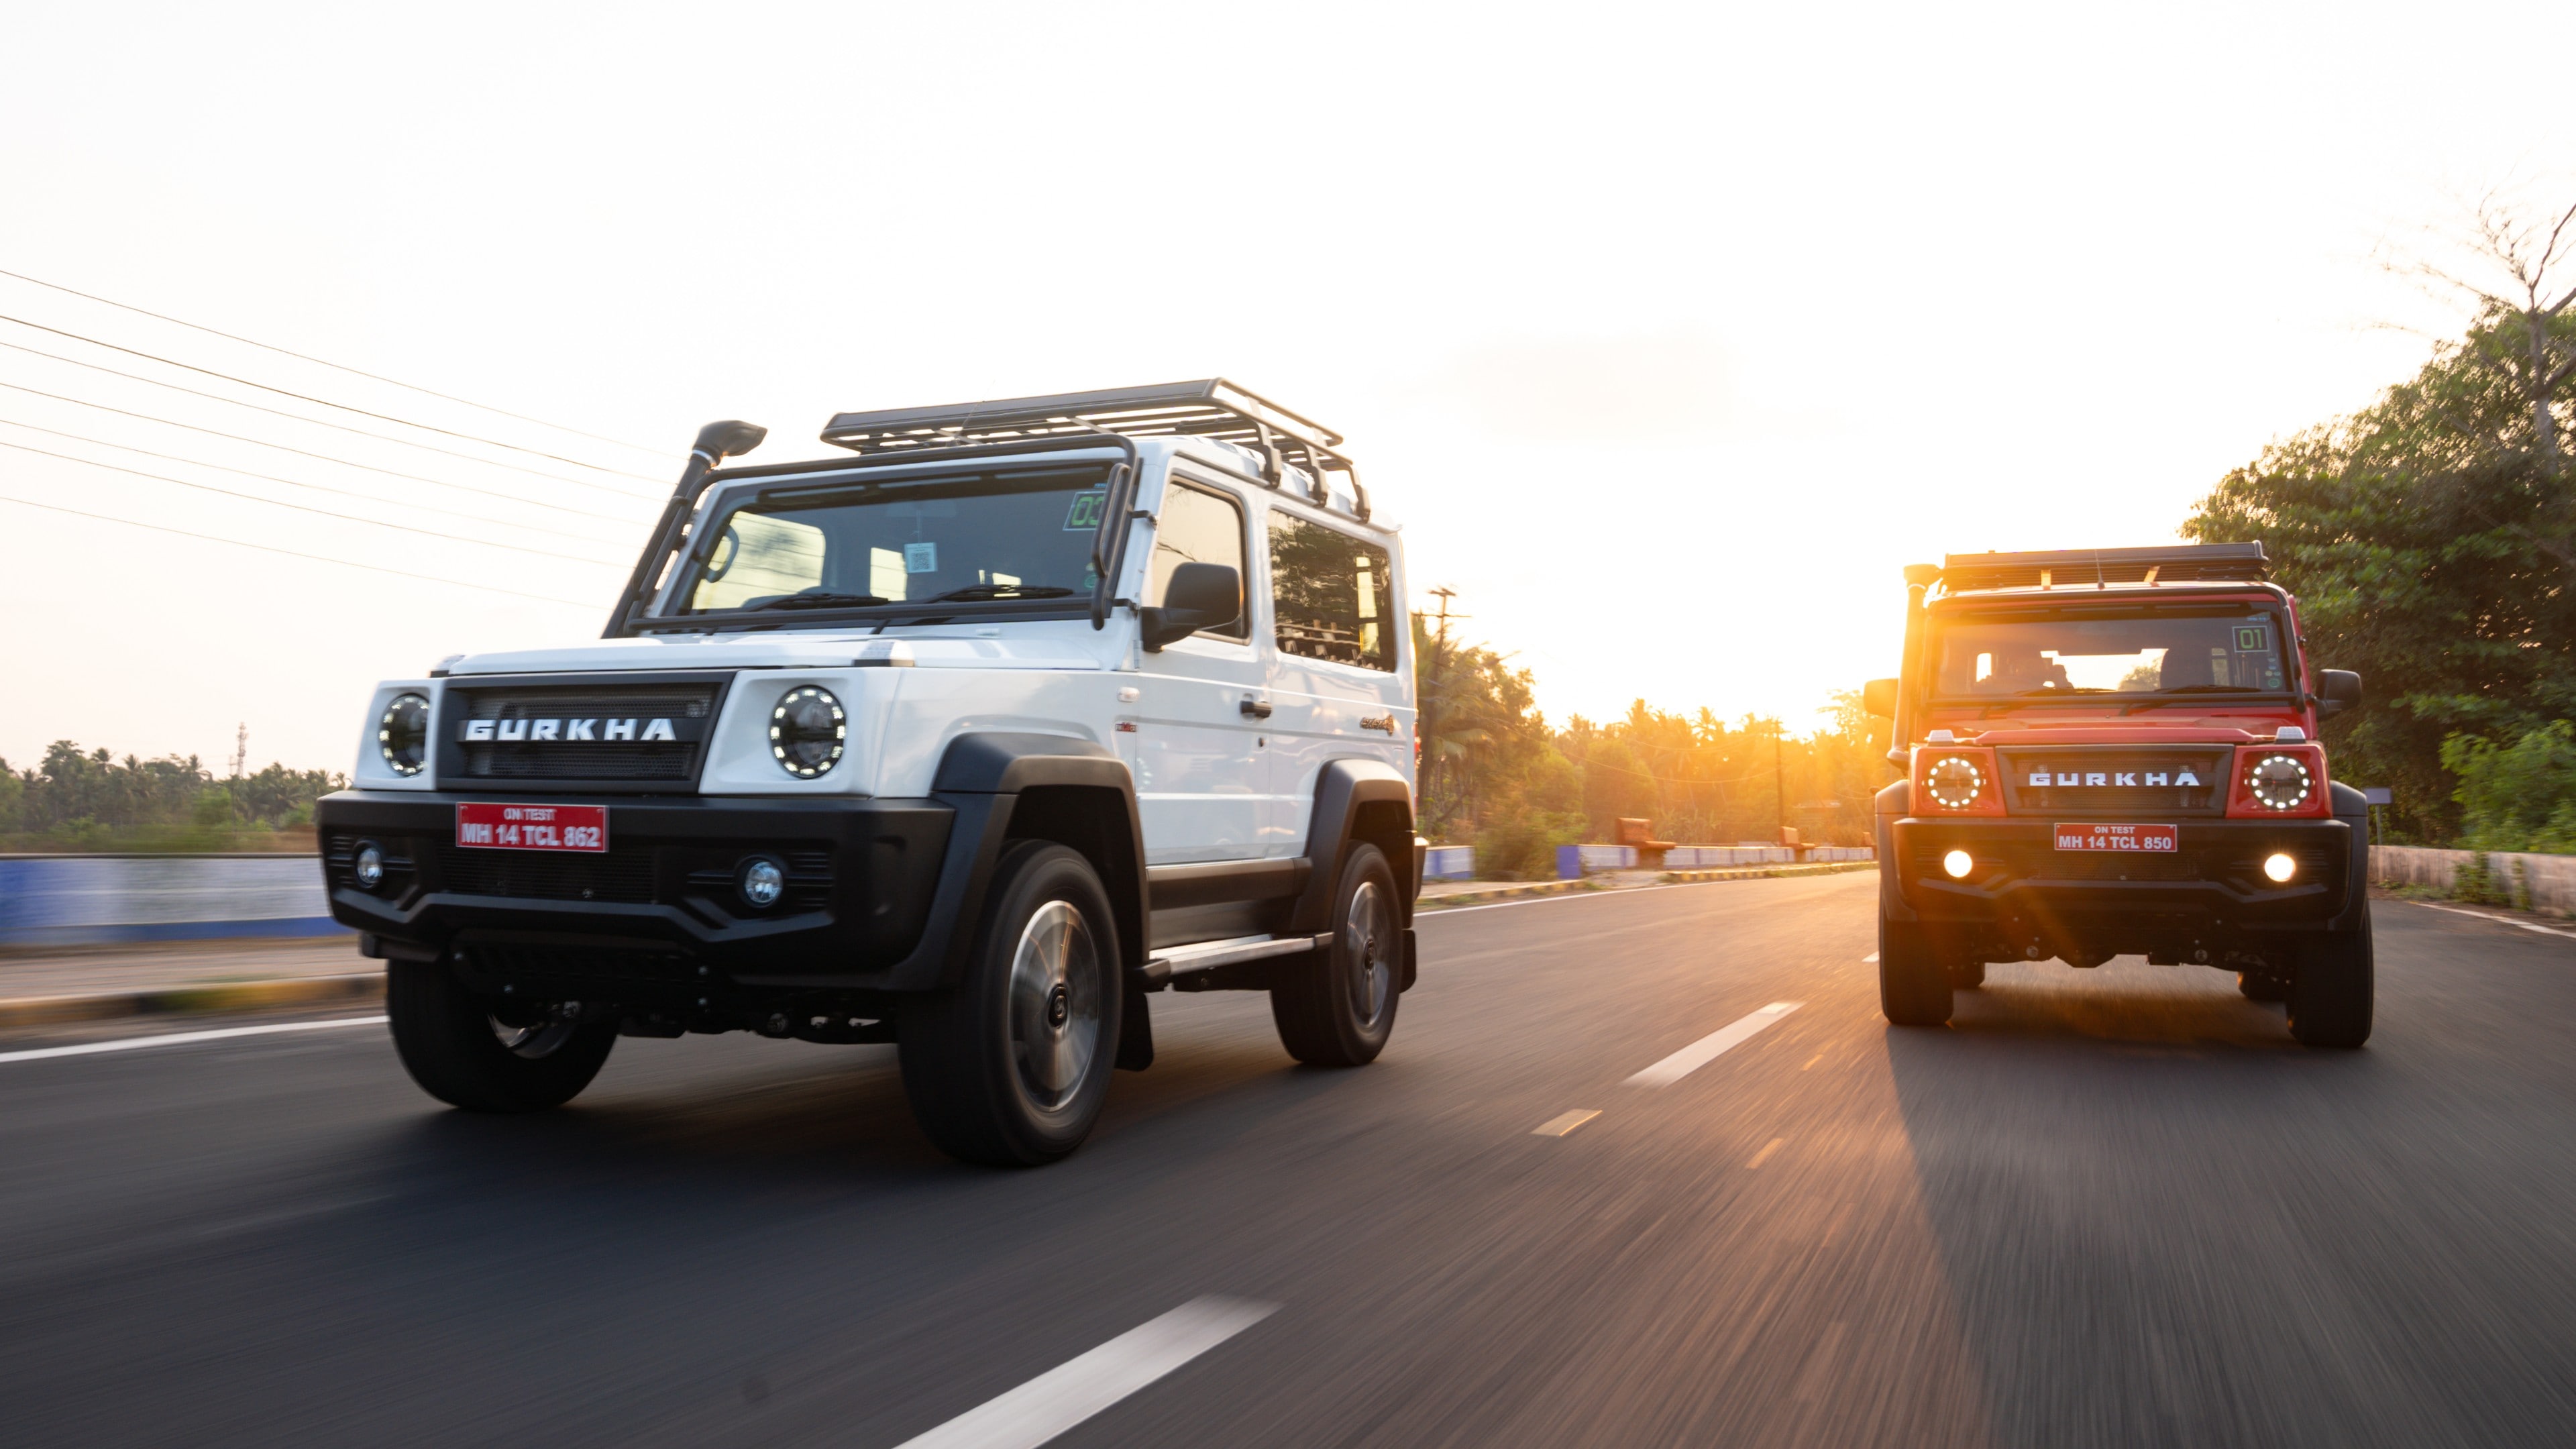 The 2024 Force Gurkha range arrives with a host of upgrades including a more powerful diesel engine, a comprehensively updated interior and a new 5-door alternative